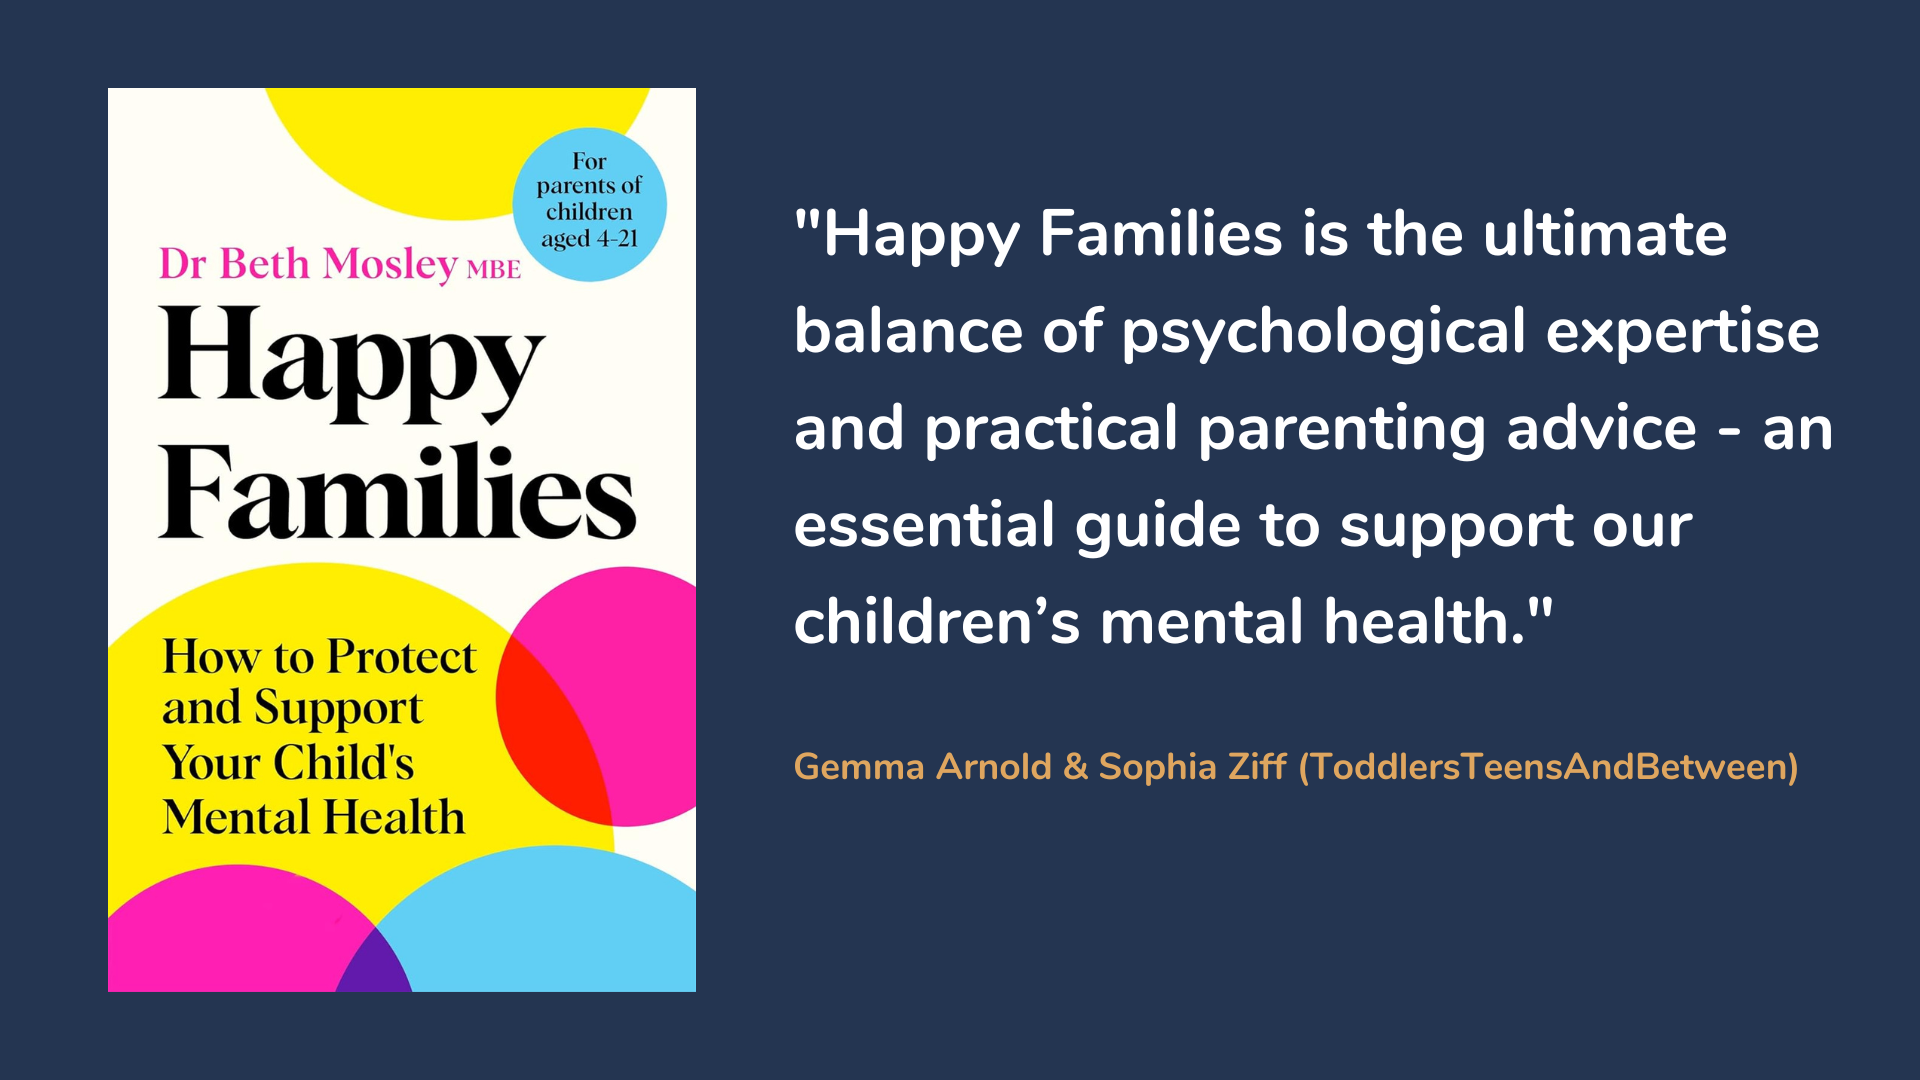 Happy Families: How to Protect and Support Your Child's Mental Health, book cover and book description.